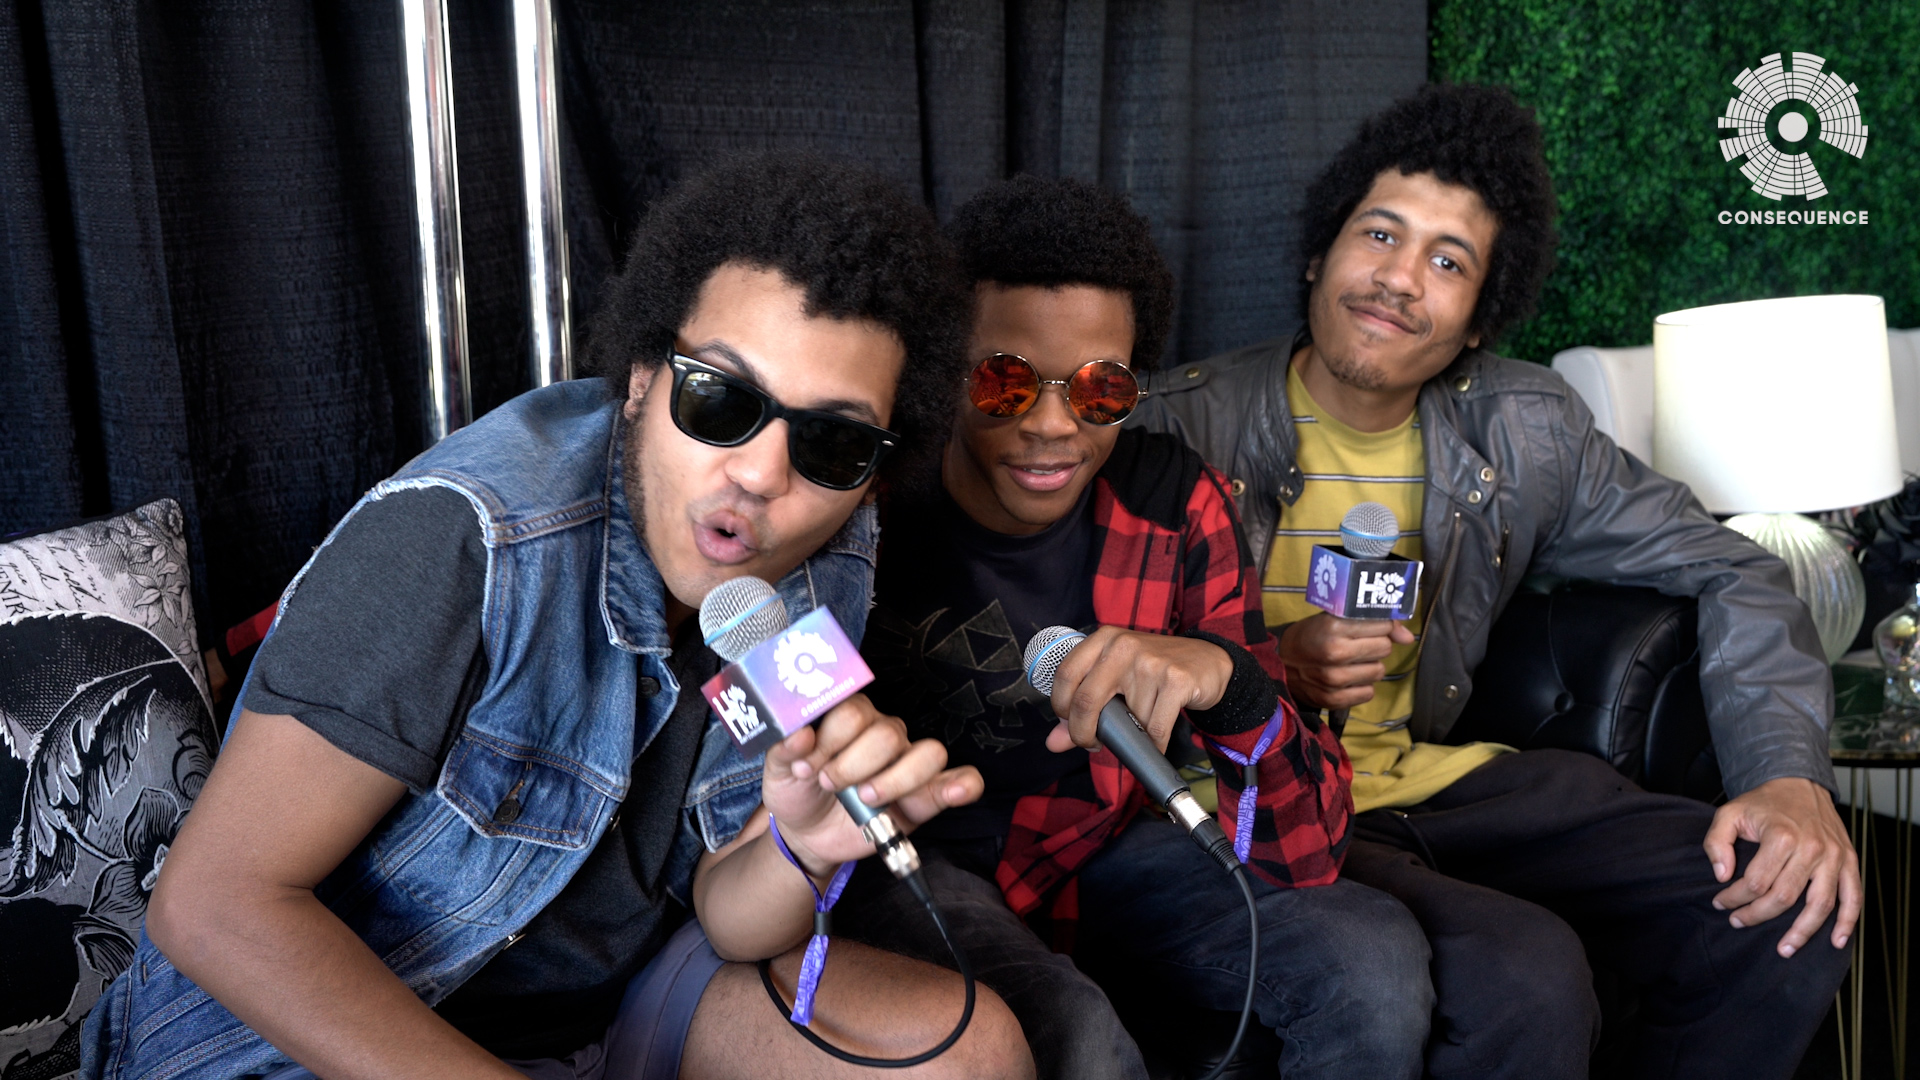 Radkey on Playing With Their Musical Heroes, School of Rock's Influence, and More